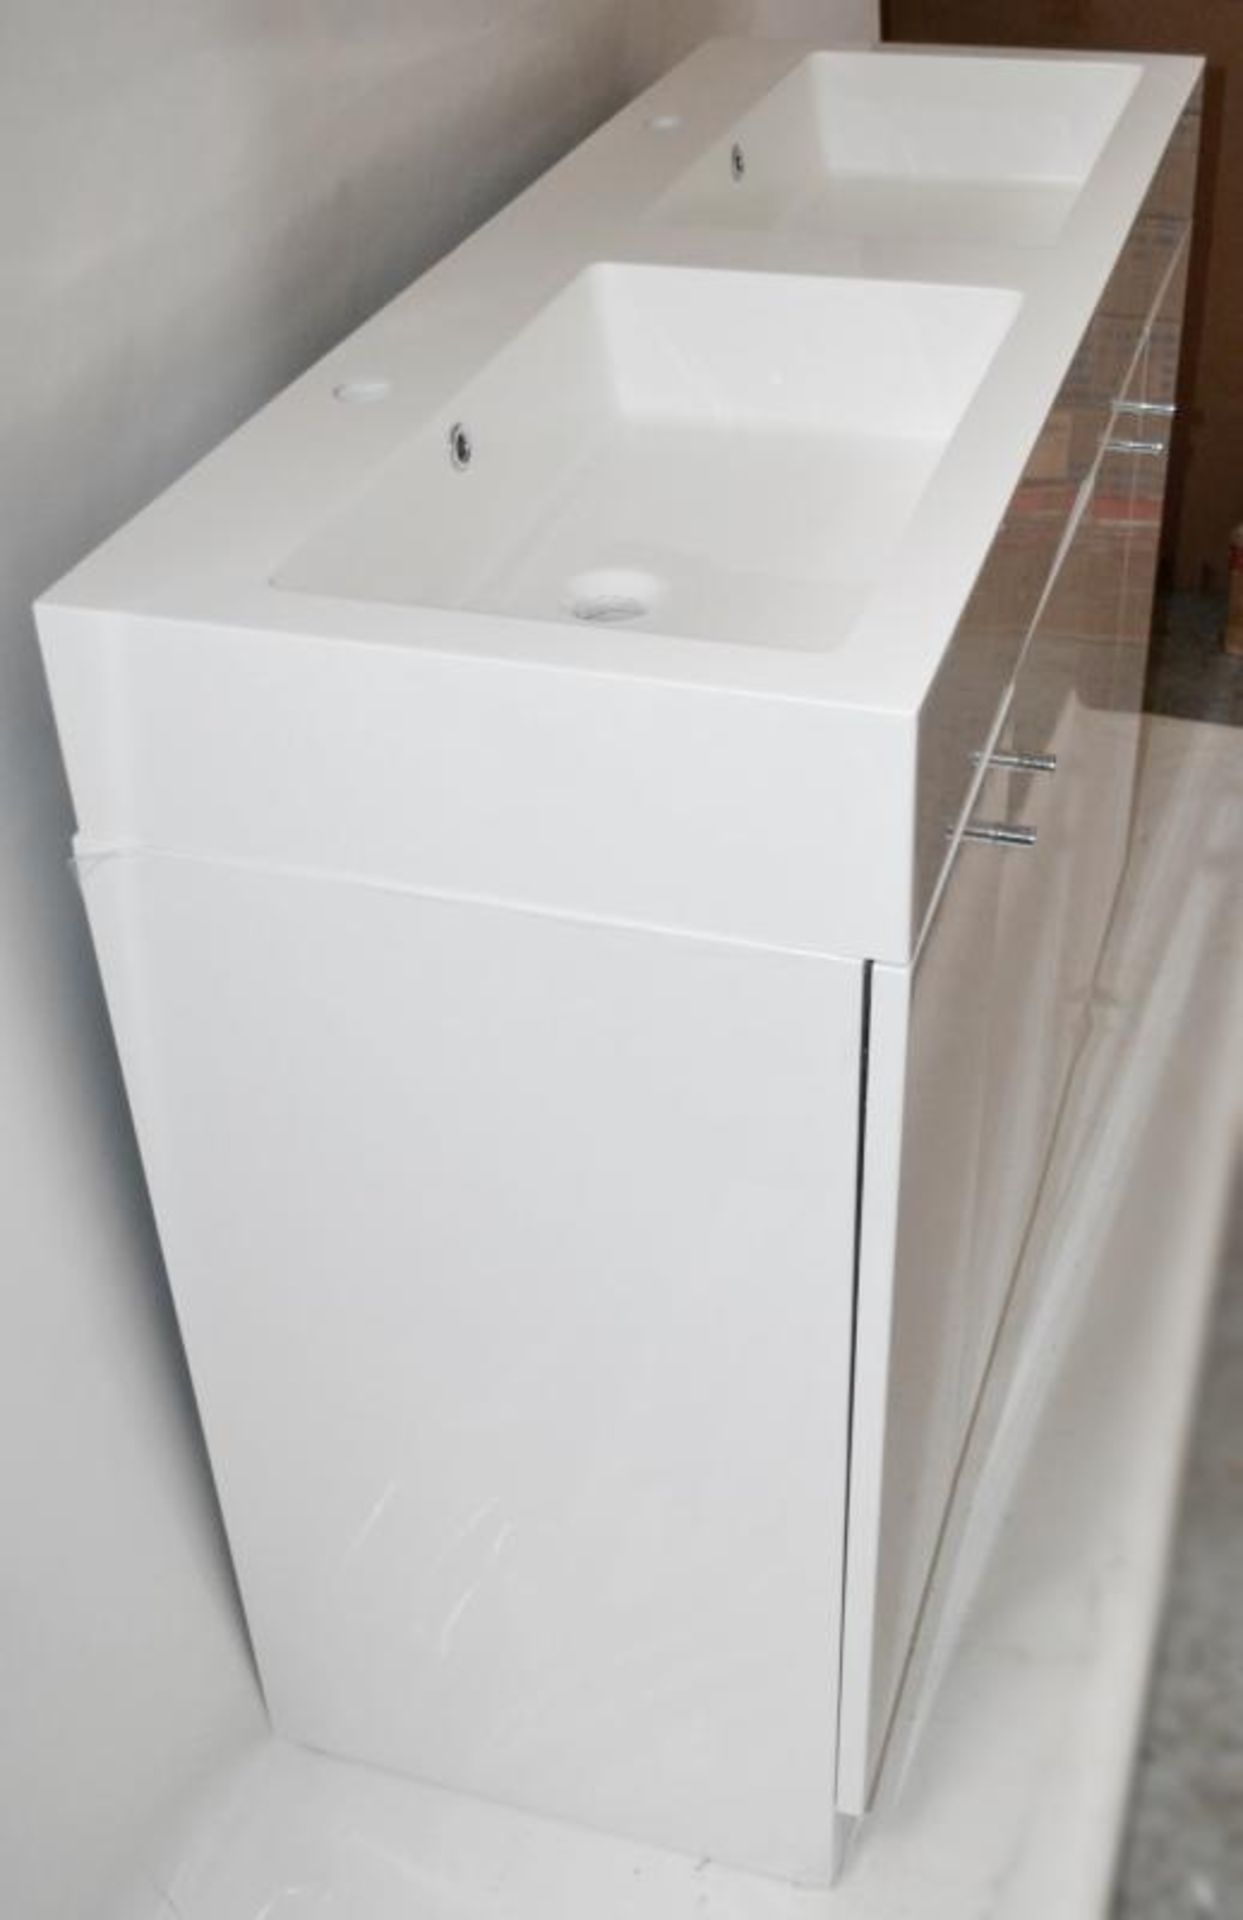 1 x Gloss White 1200mm 4-Door Double Basin Freestanding Bathroom Cabinet - New & Boxed Stock - CL307 - Image 3 of 7